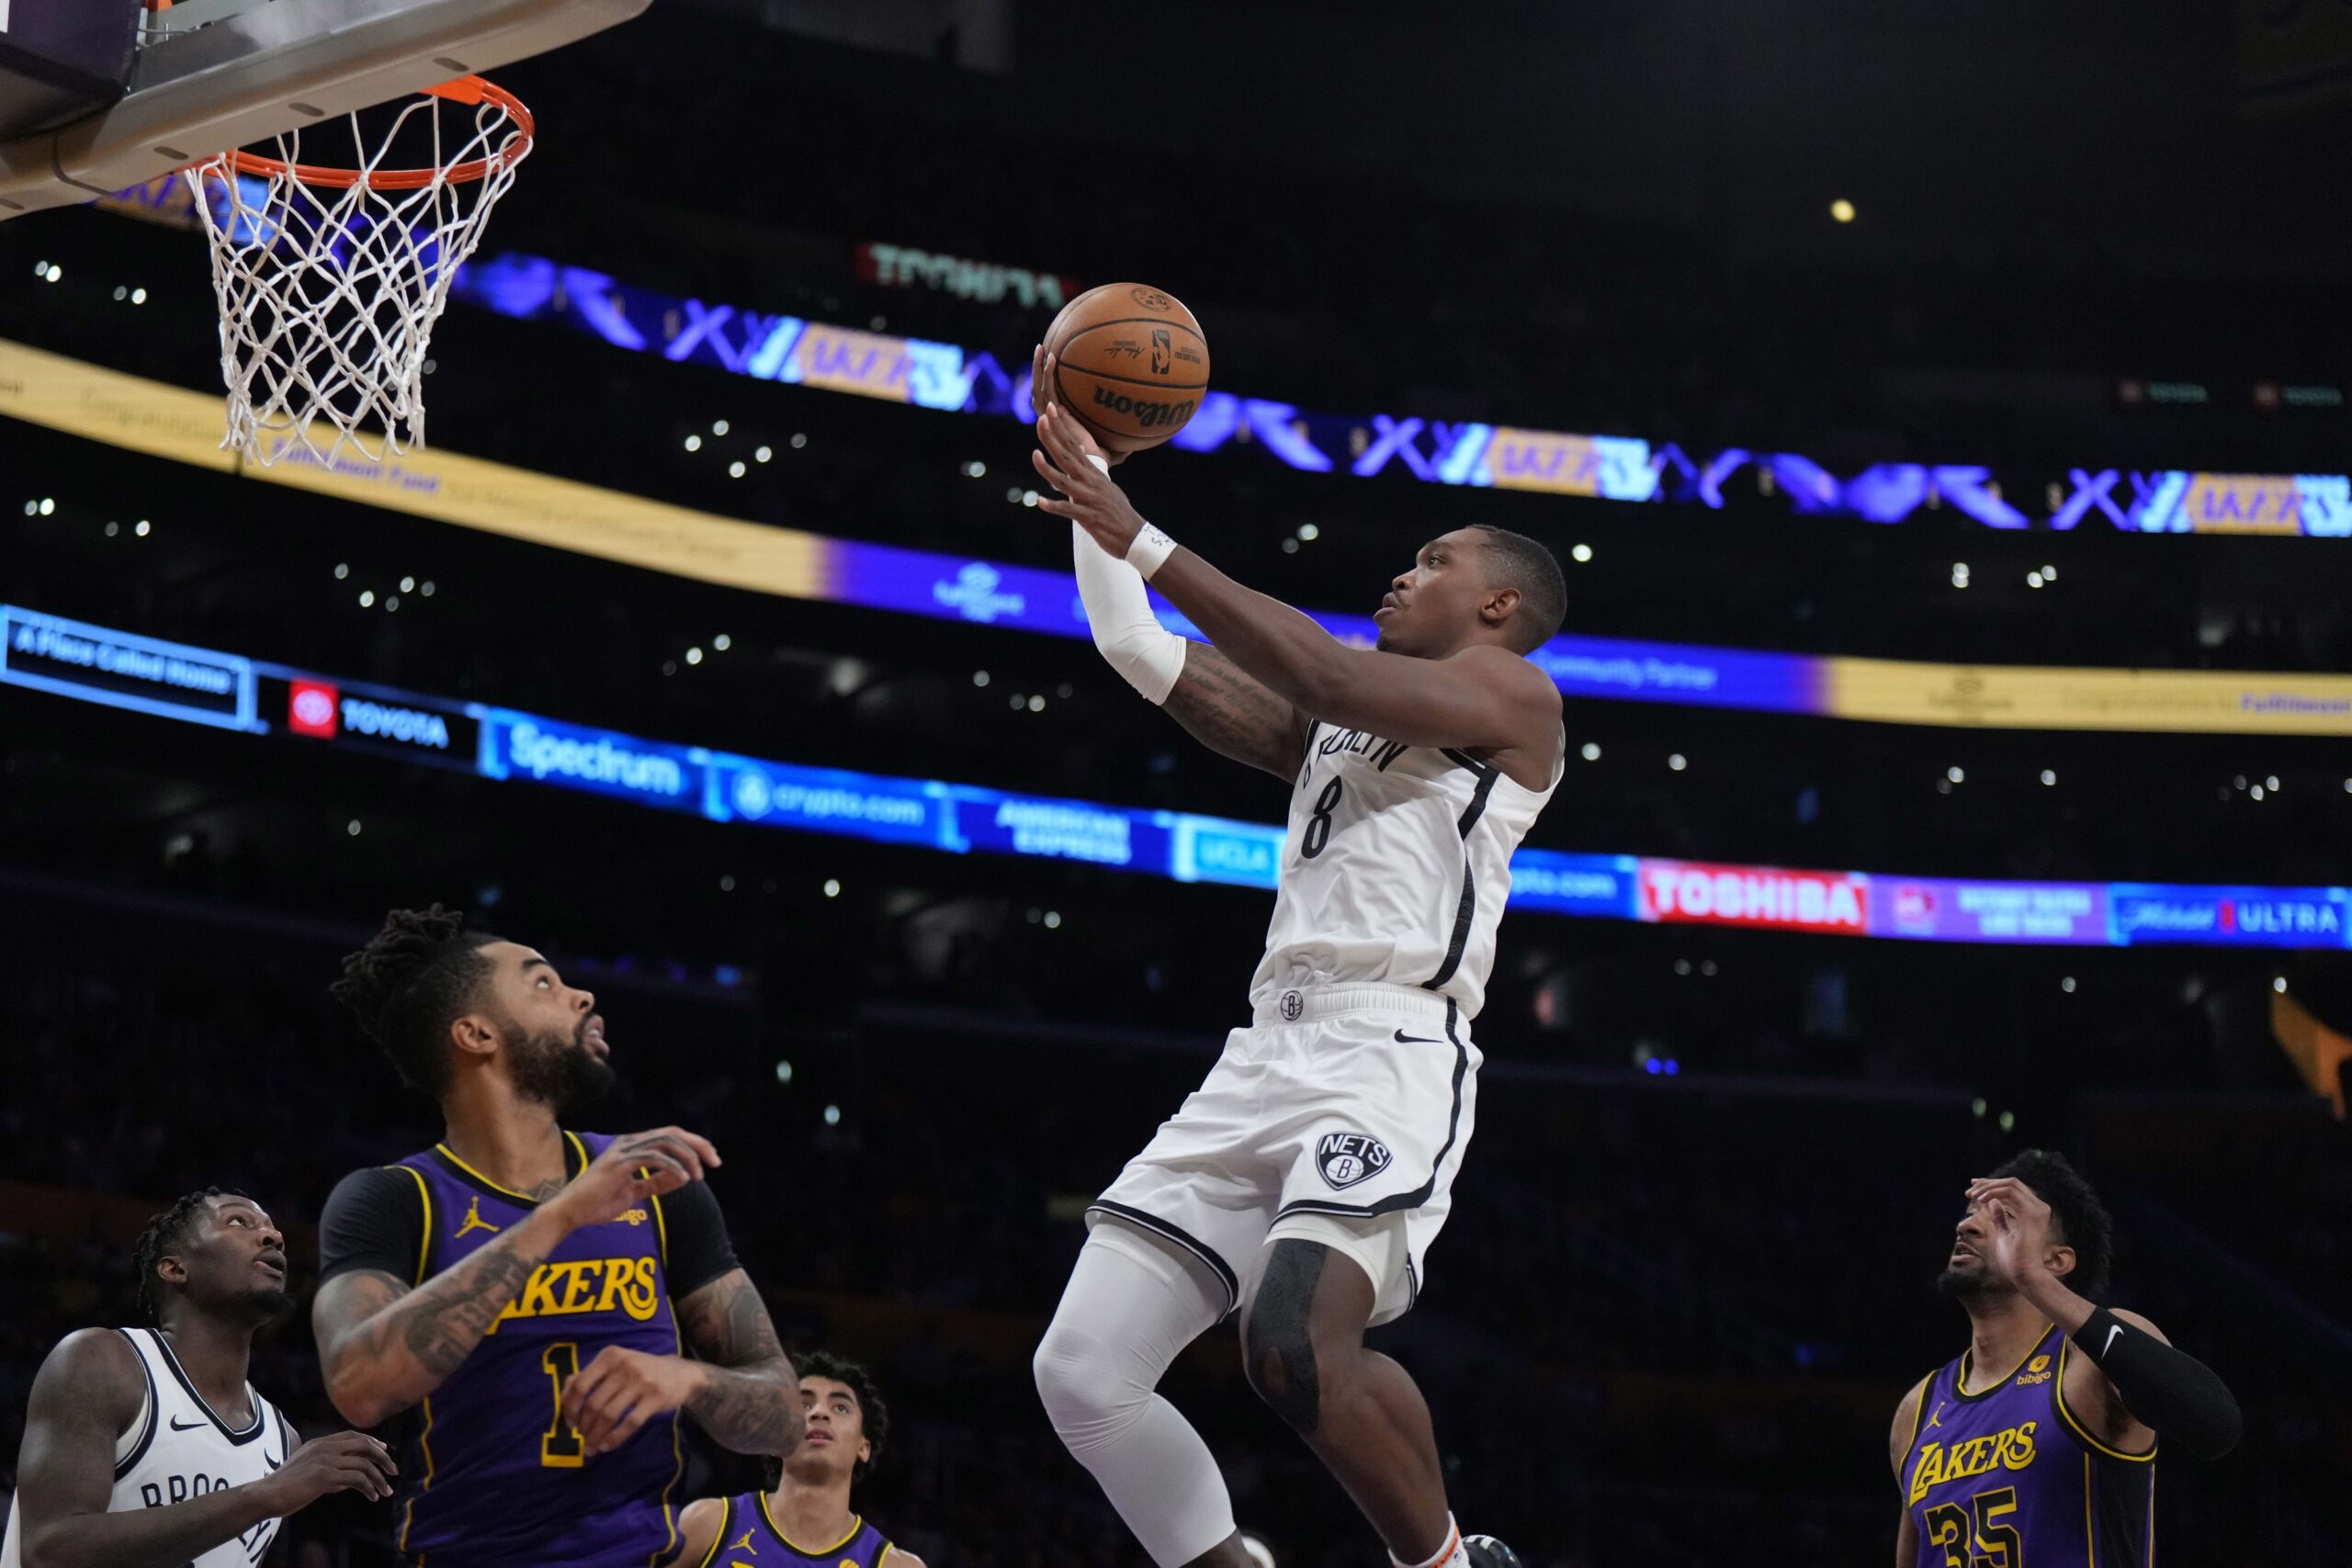 Brooklyn Nets scorer Lonnie Walker IV goes up for layup against Los Angeles Lakers